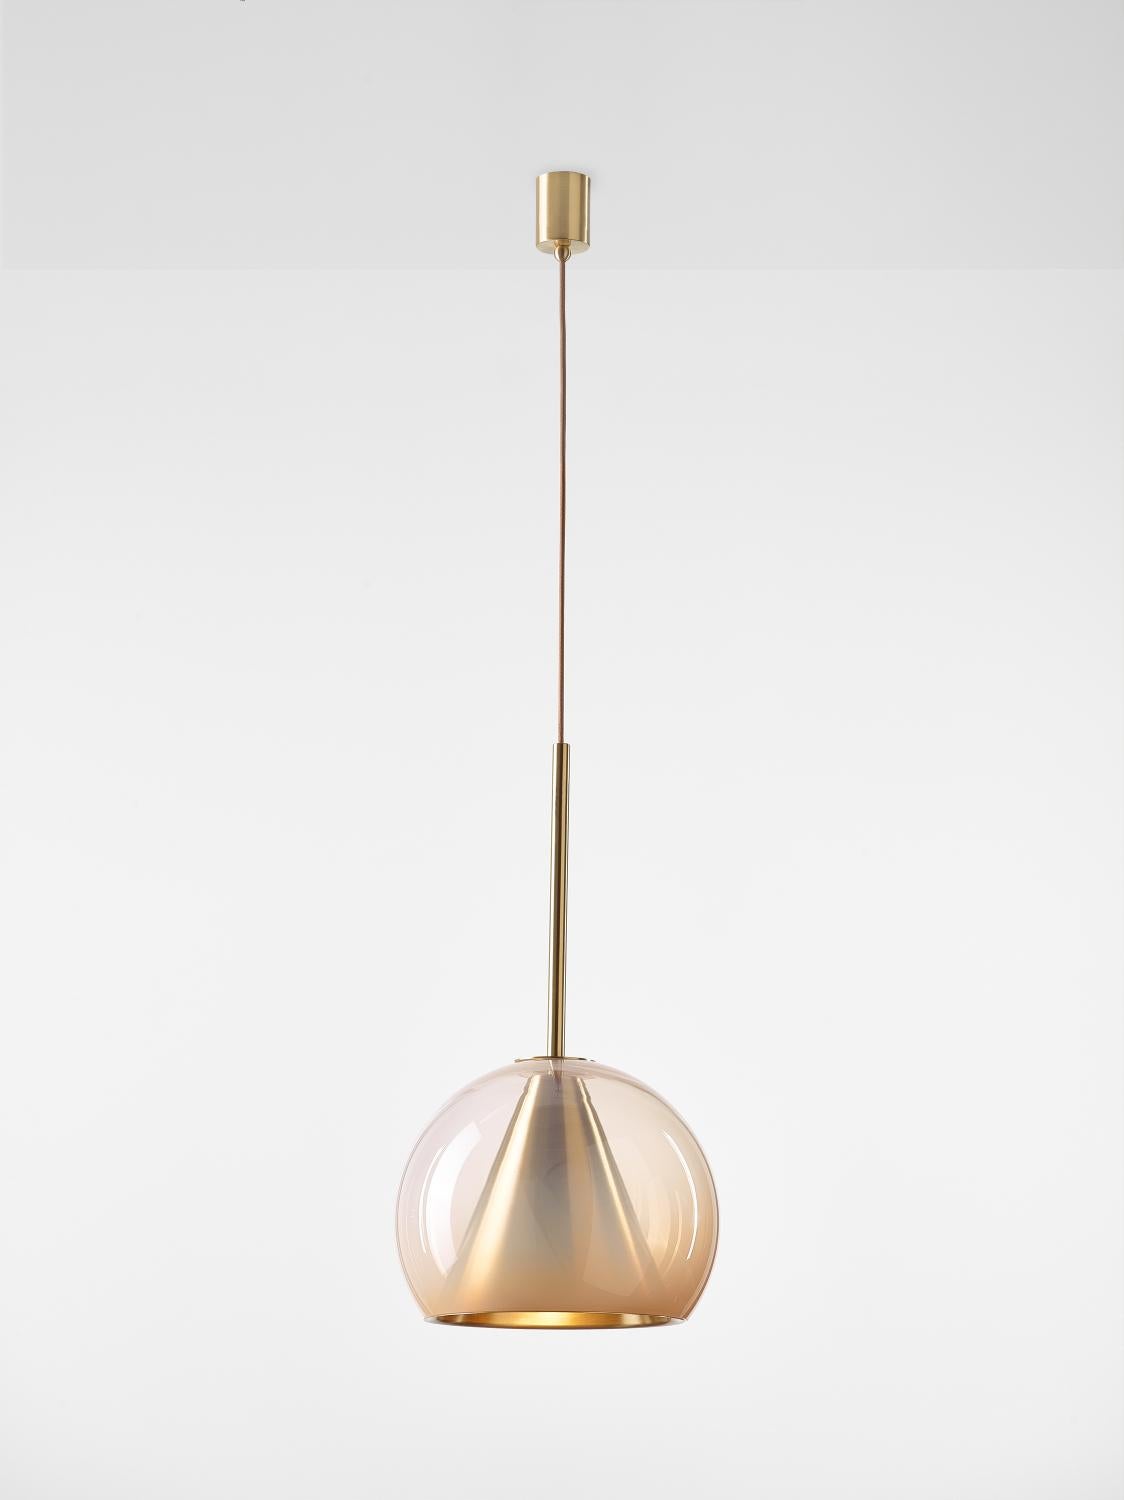 Set of 2 big neutral nude kono pendant lights by Dechem Studio
Dimensions: D 35 x H 75 cm
Materials: brass, glass.
Also available: different finishes and colours available,

This collection of suspended light fixtures combines the elementary